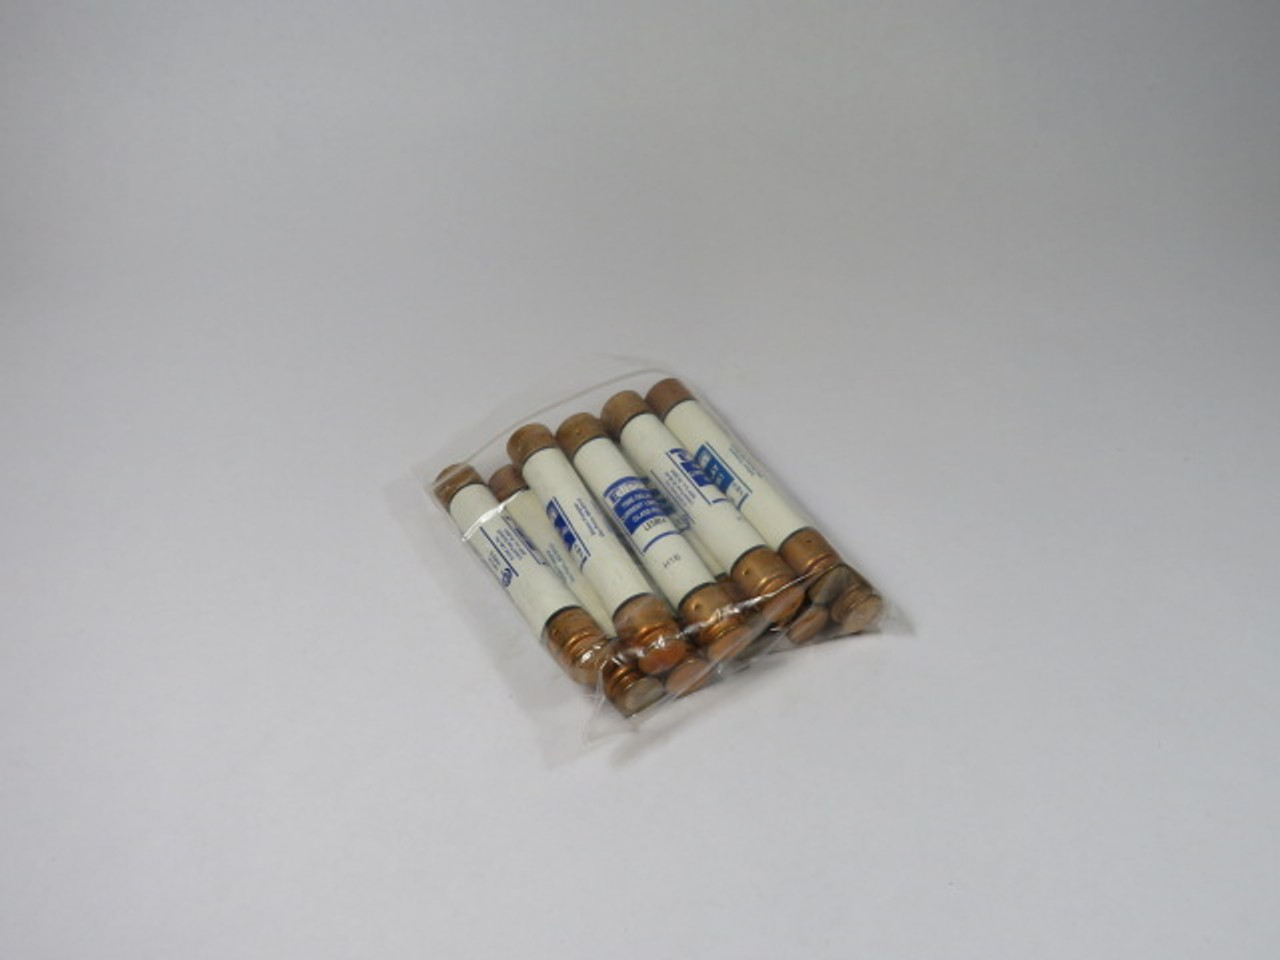 Edison LESRK4 Time Delay Current Limiting Fuse 4A 600V Lot of 10 USED